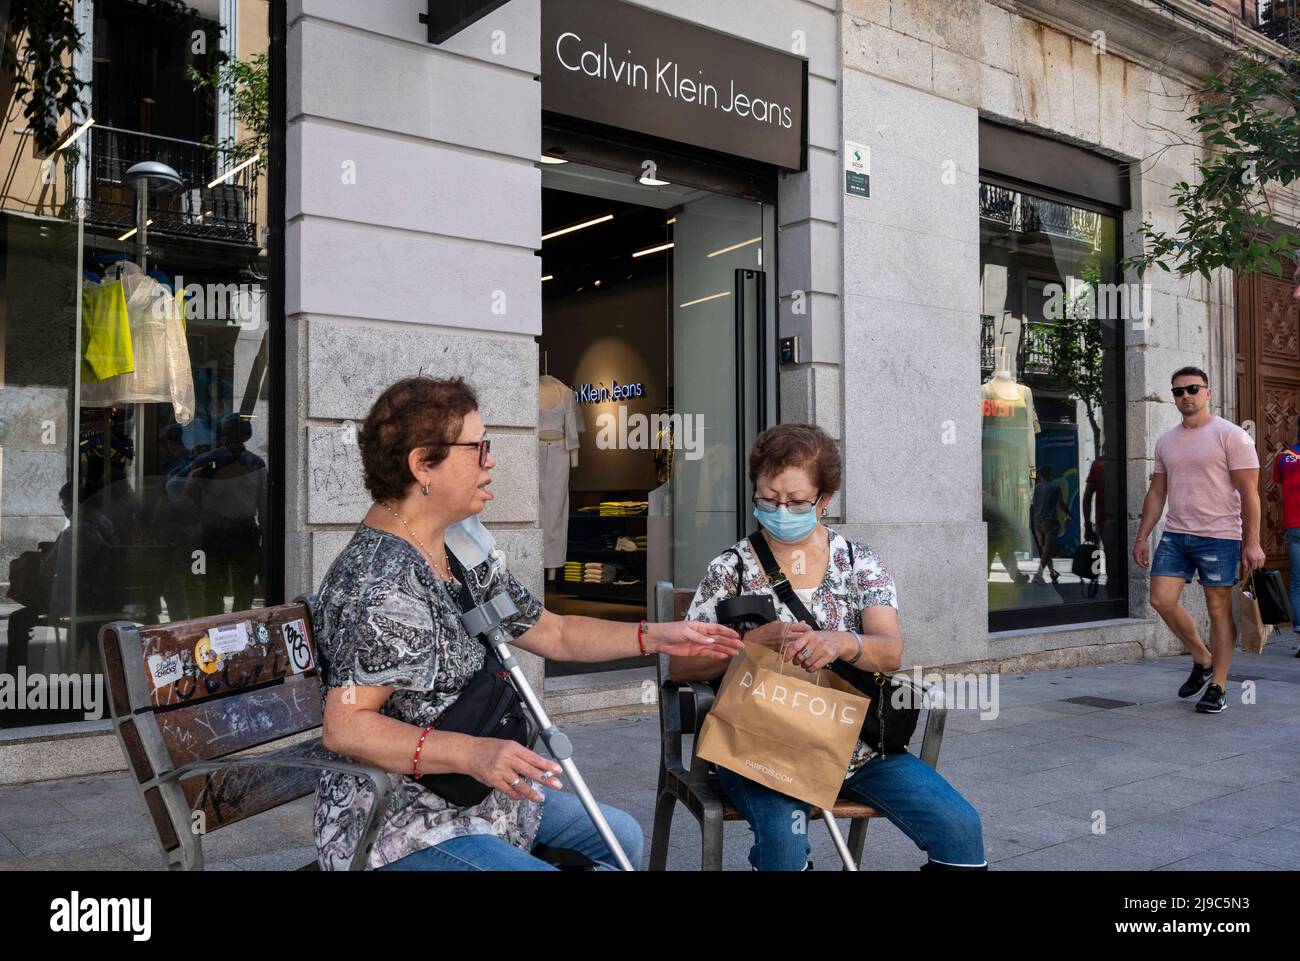 May 17, 2022, Madrid, Spain: A shopper is seen sitting on a public bench as  she holds a shopping bag from the Portuguese women's accessories brand  Parfois in front of the American